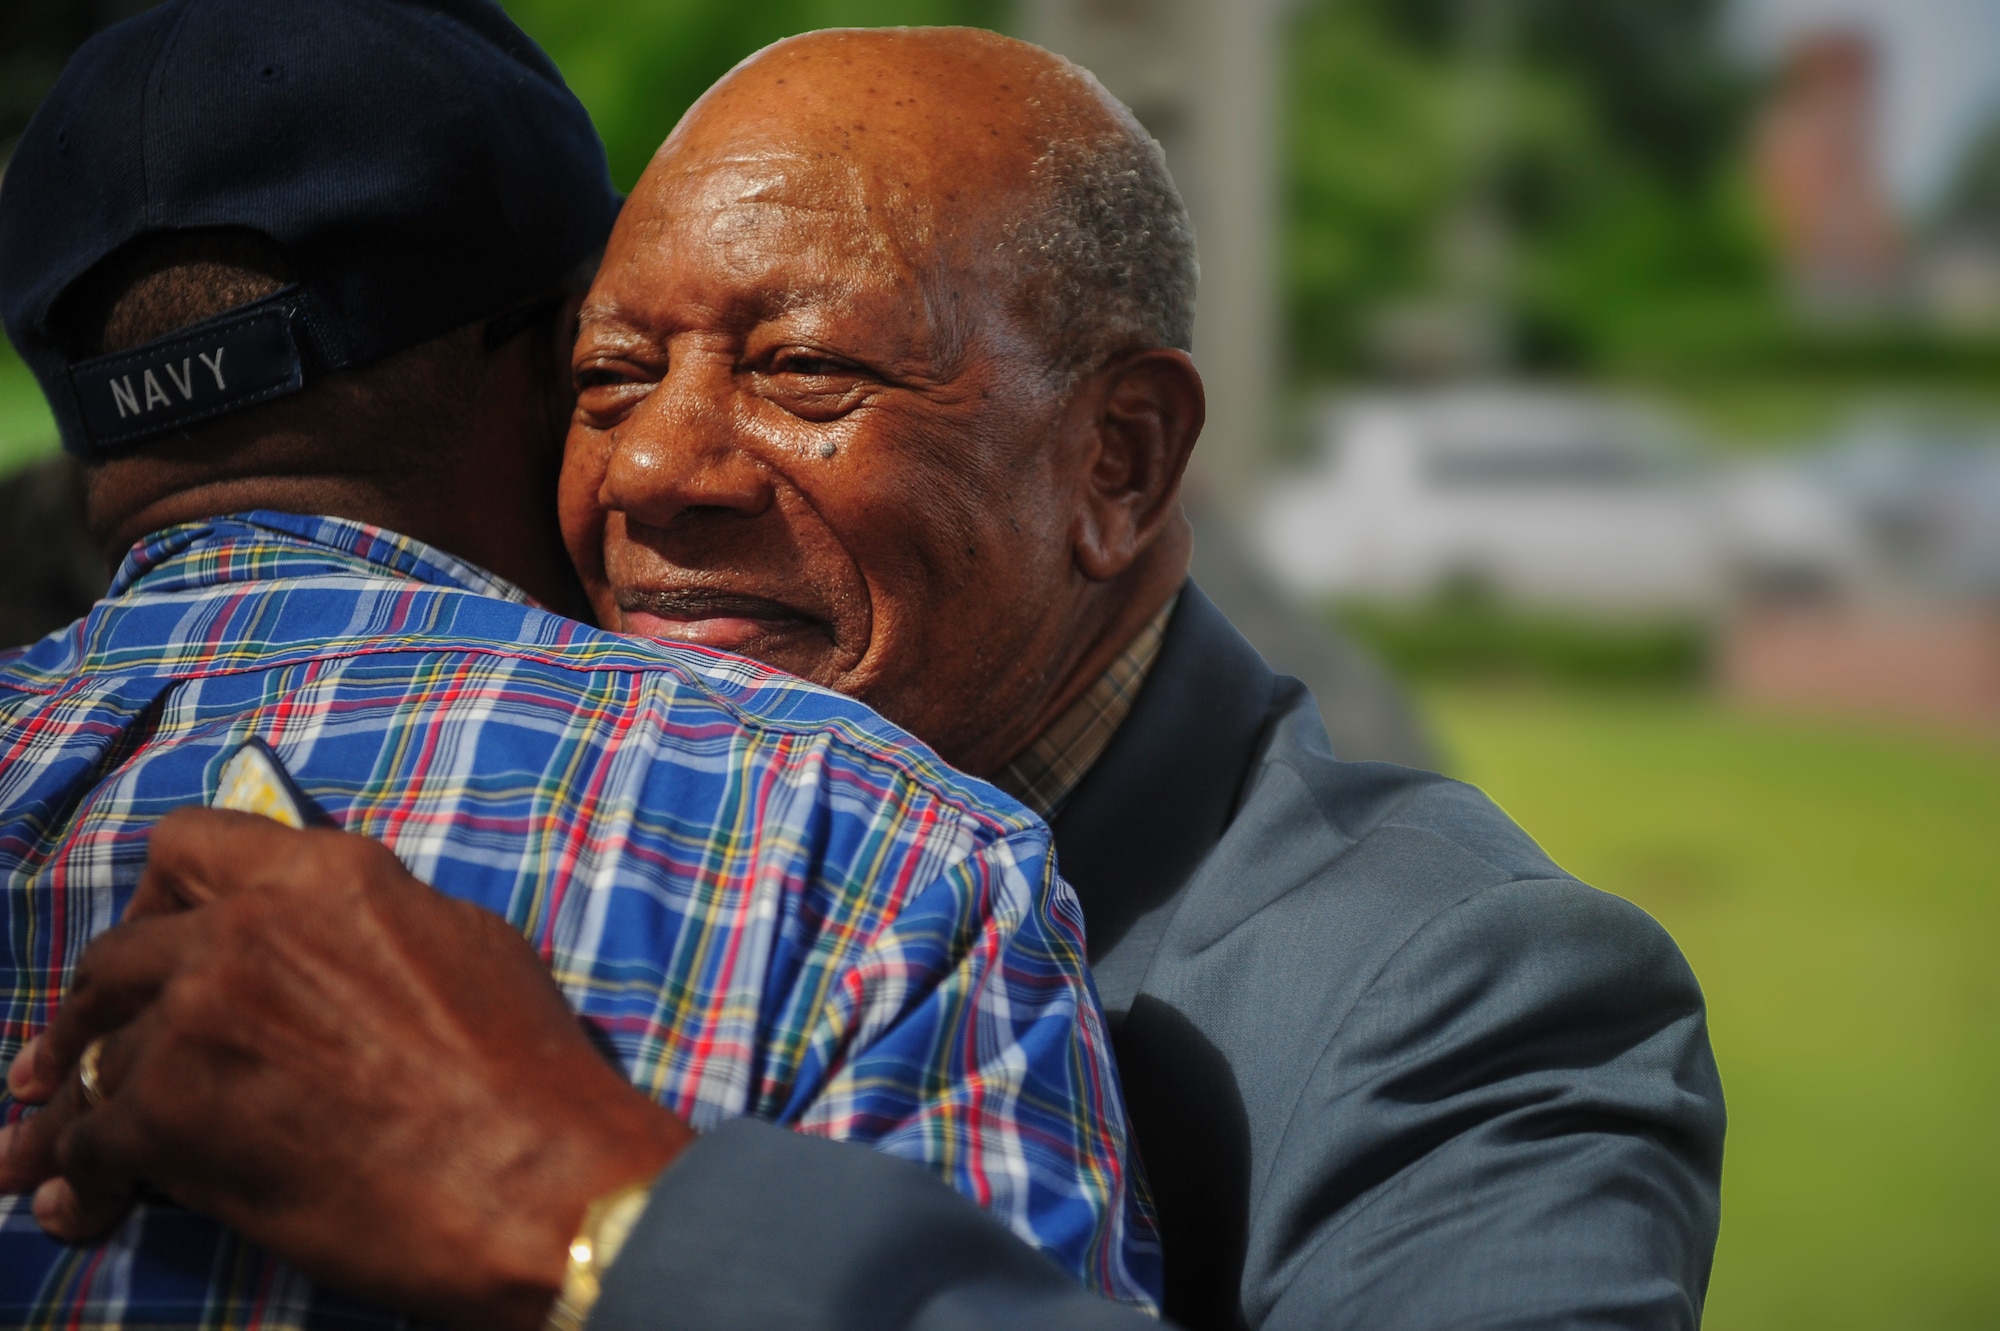 Retired Staff Sgt. Elbert Scott hugs a fellow veteran after a medal presentation ceremony in his honor, July 21, 2014, in downtown Goldsboro, N.C. Scott served at Seymour Johnson Air Force Base with the 4th Supply Squadron until his honorable discharge in 1962. (U.S. Air Force photo/Airman 1st Class Brittain Crolley)